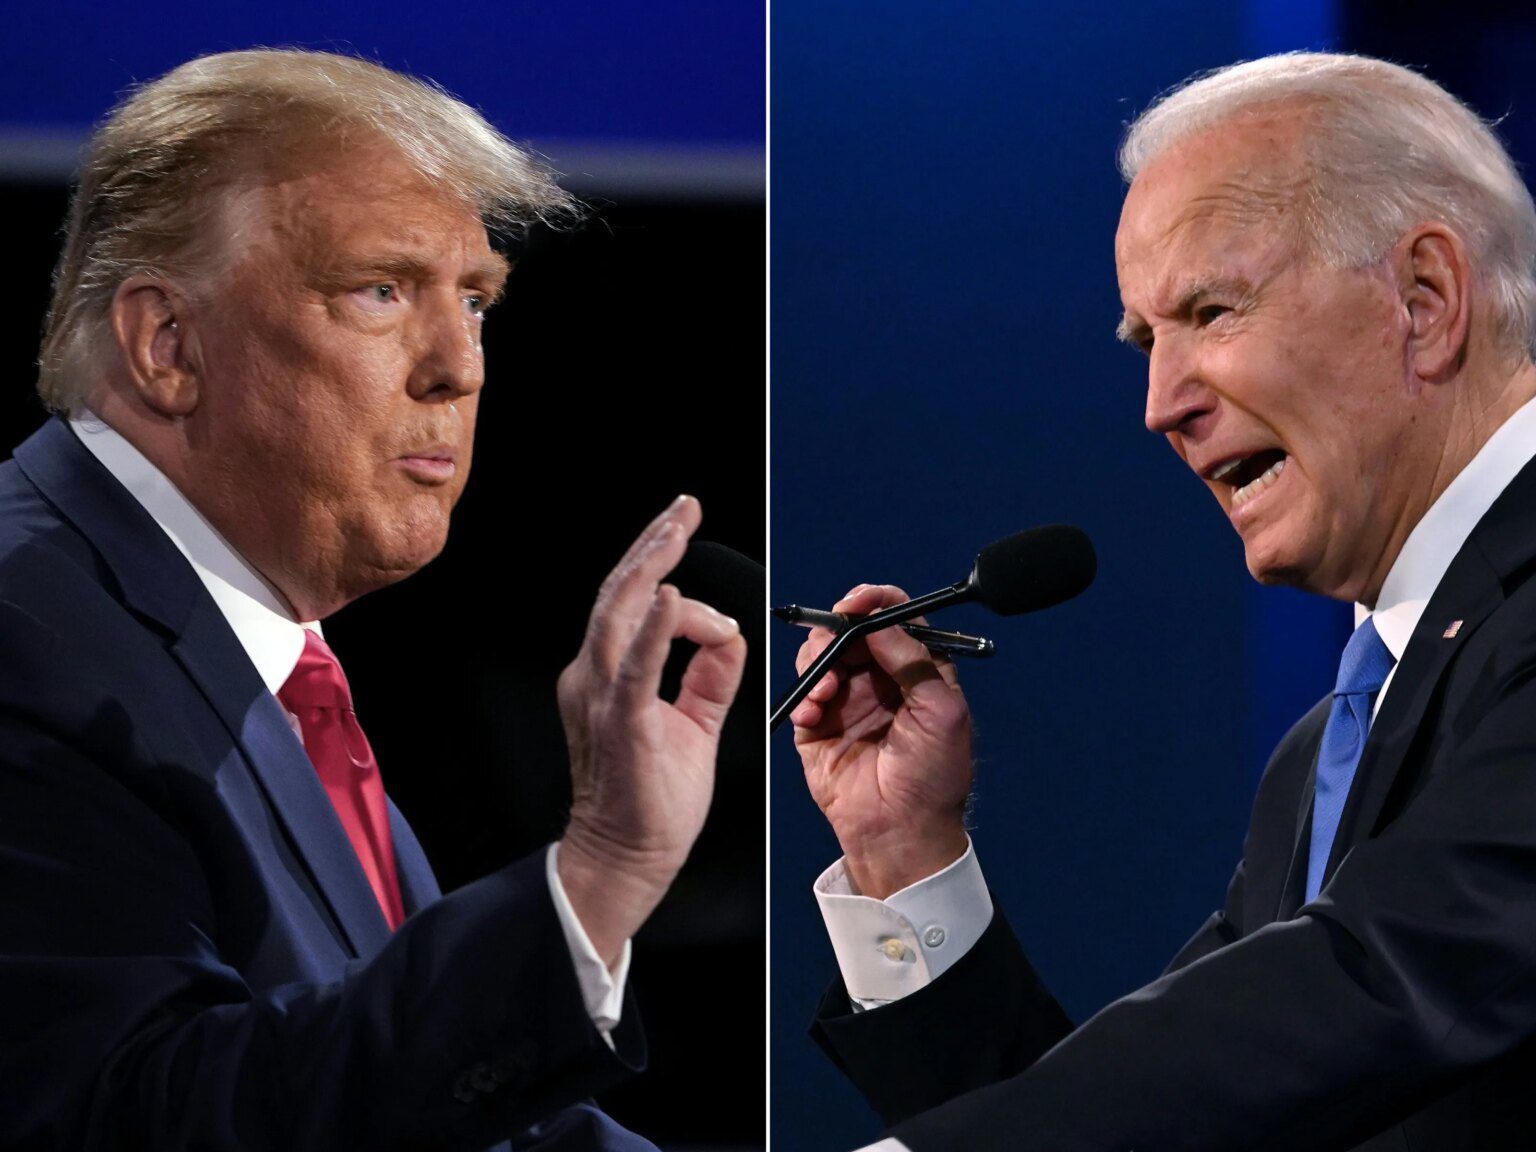 Biden against Trump.  Americans weigh in on possible